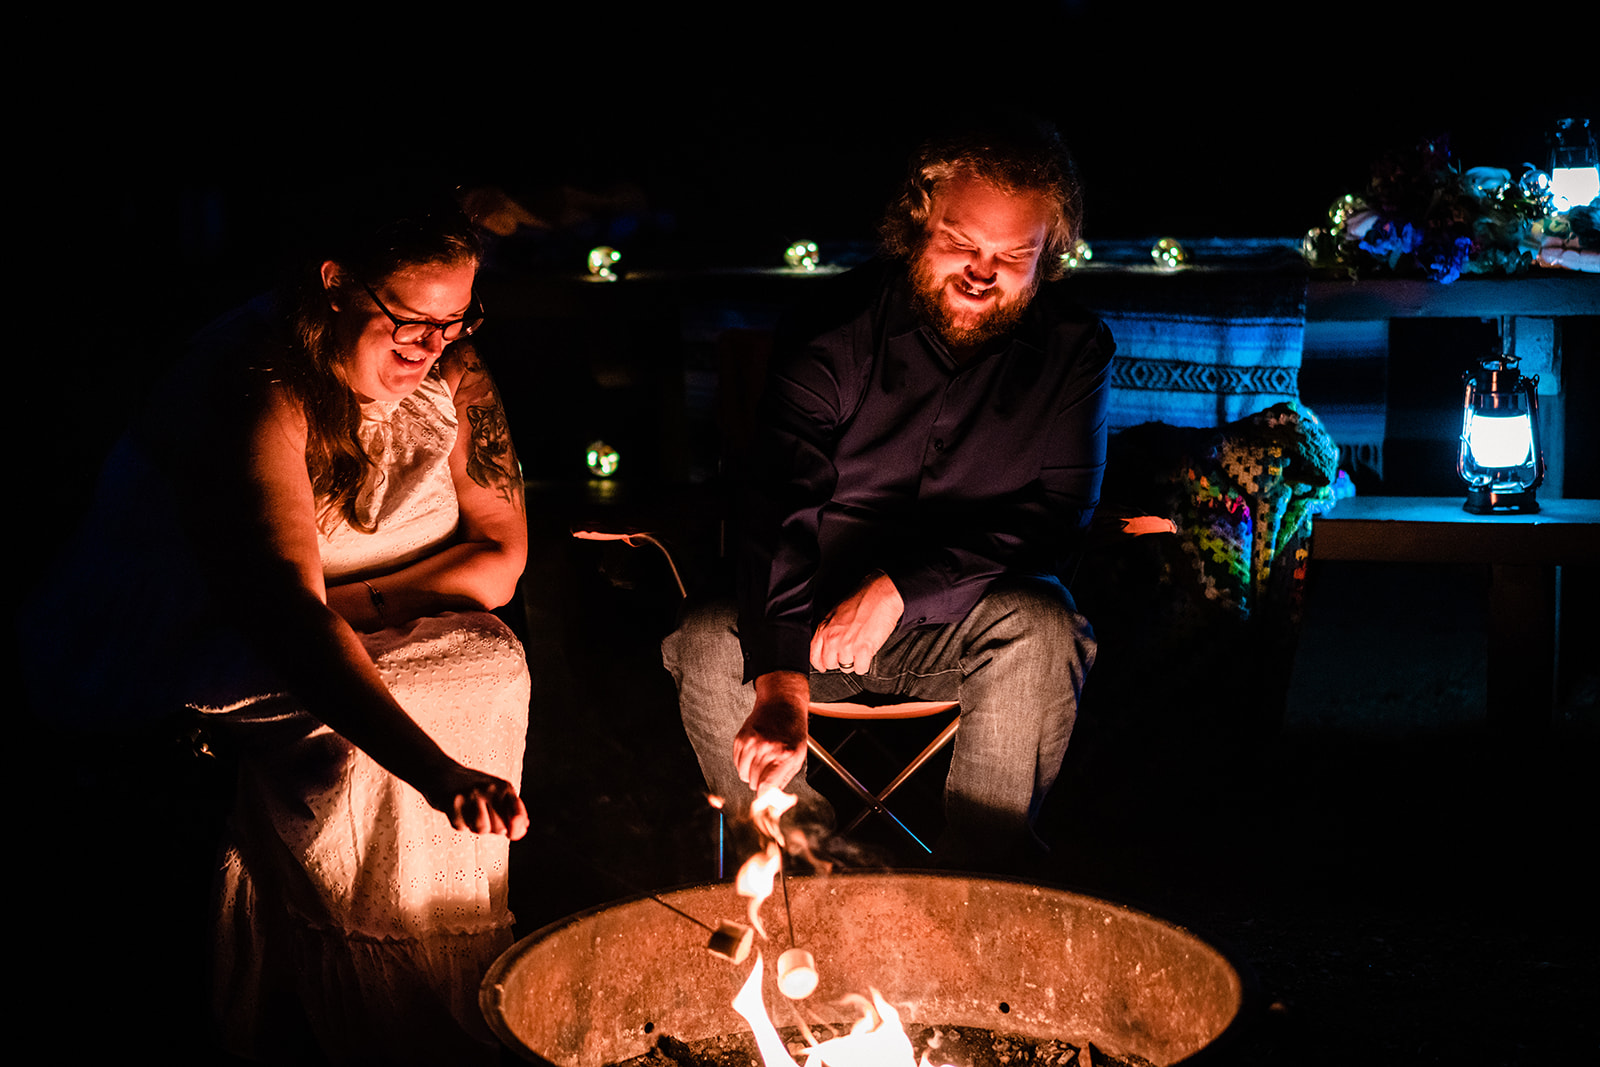 Bride and groom making S'mores as their wedding ritual